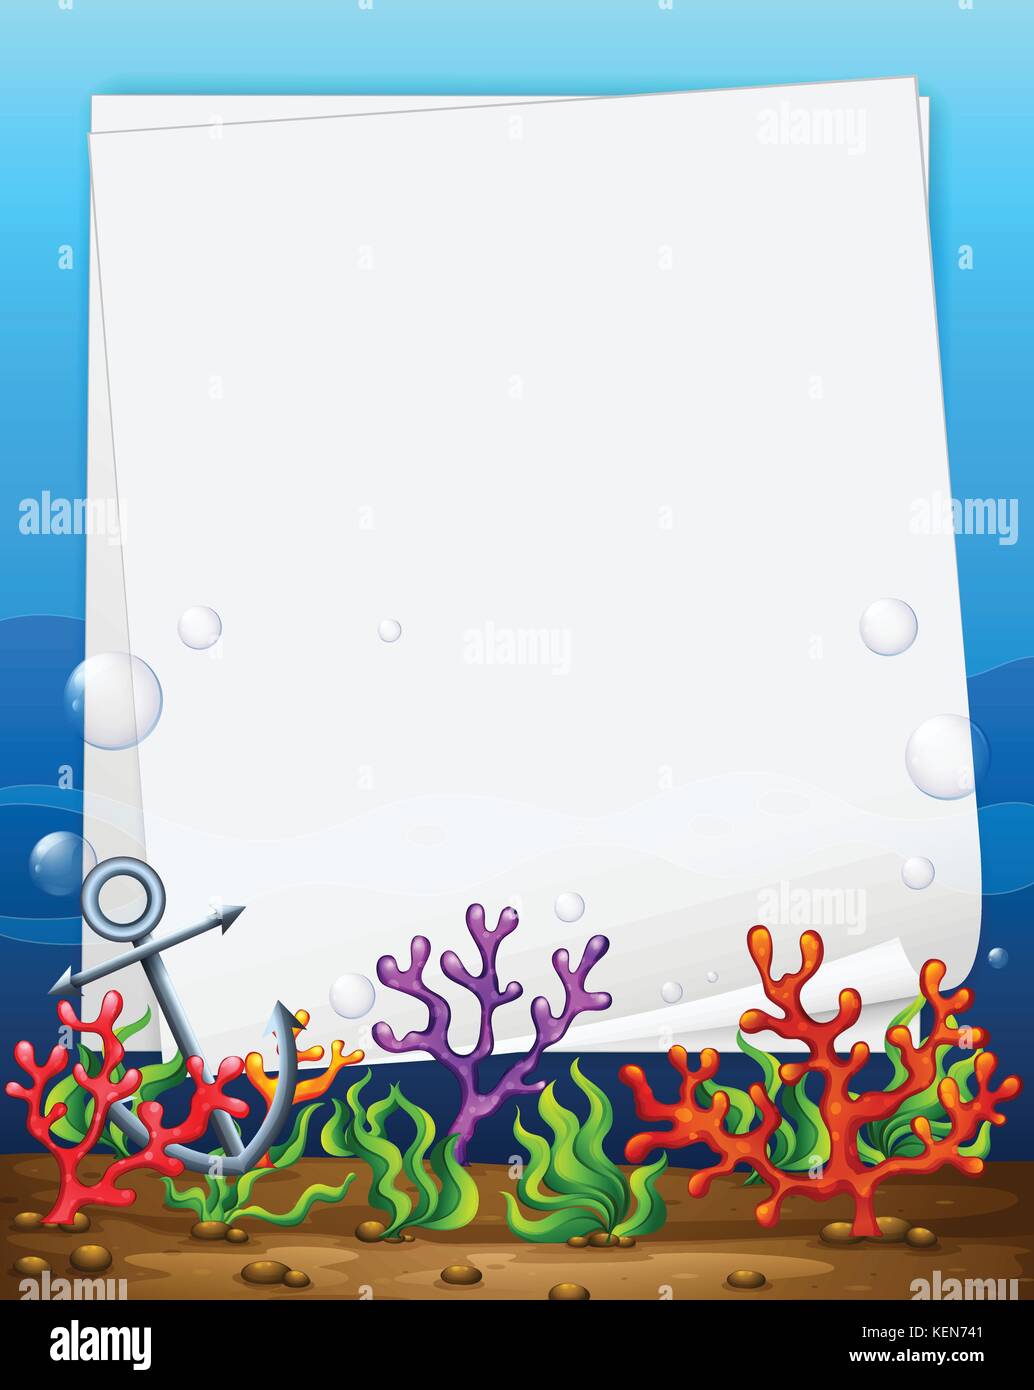 Illustration of a banner with underwater background Stock Vector